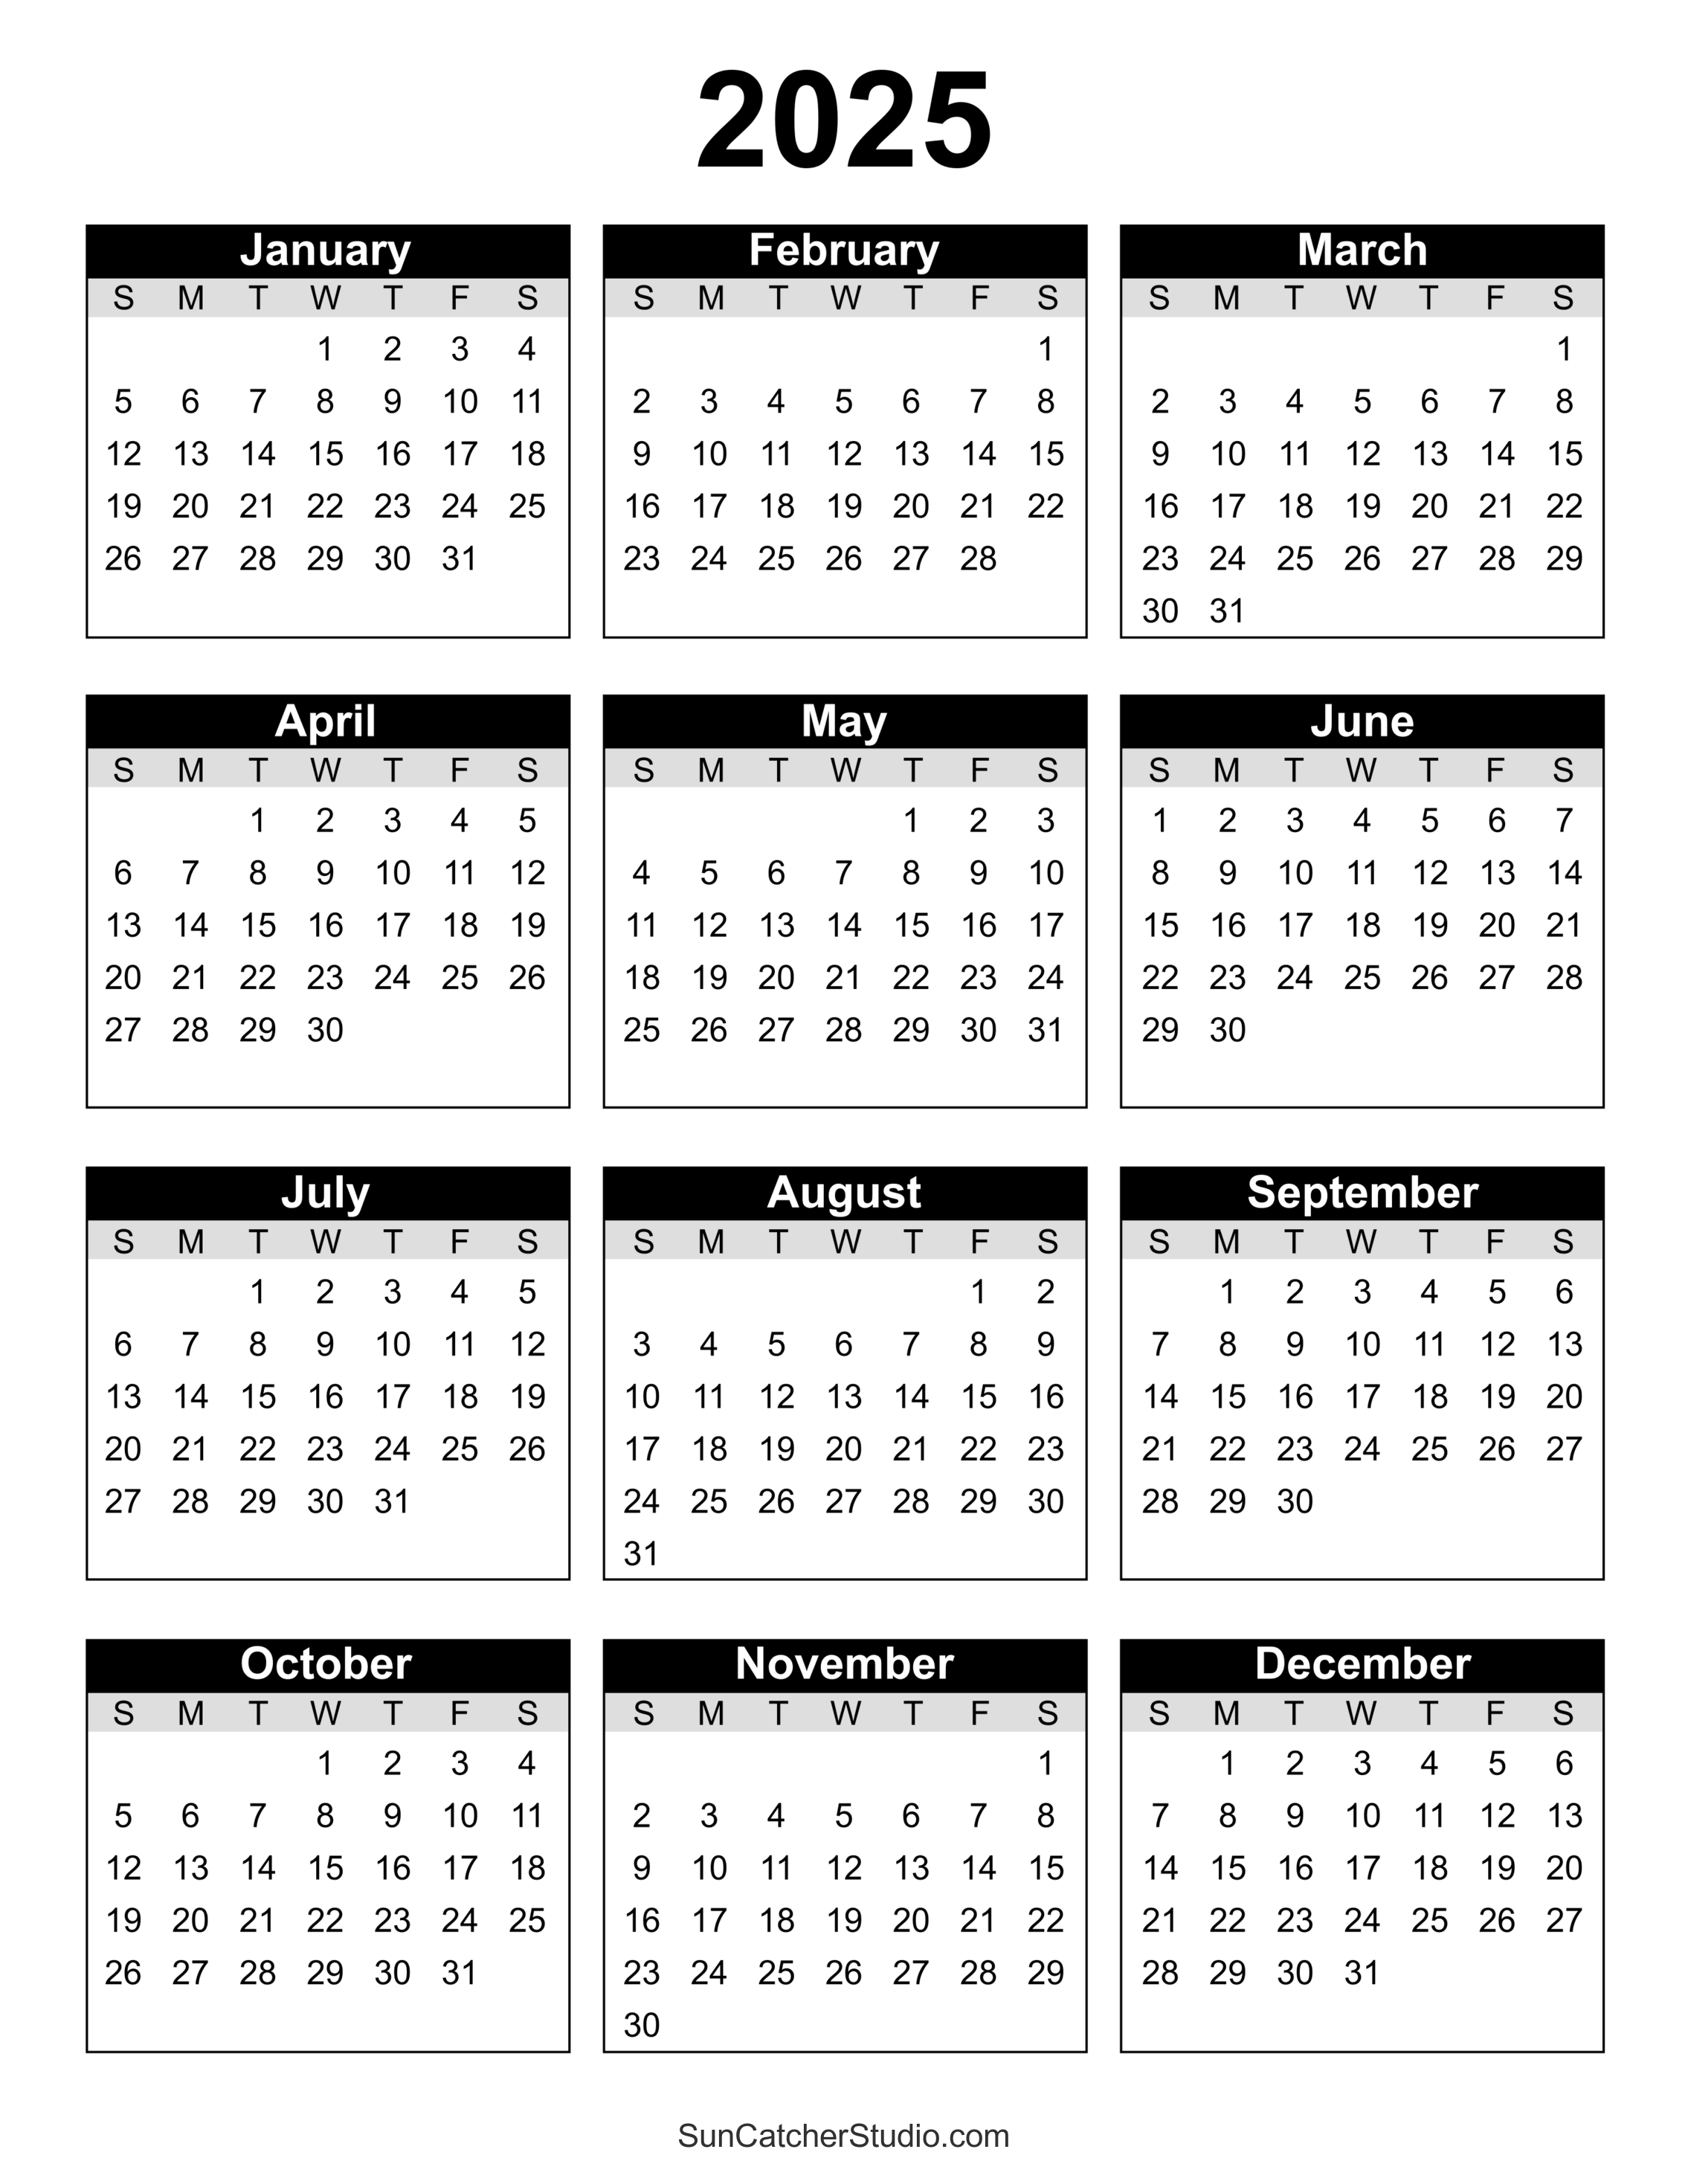 Free Printable 2025 Yearly Calendar DIY Projects, Patterns, Monograms